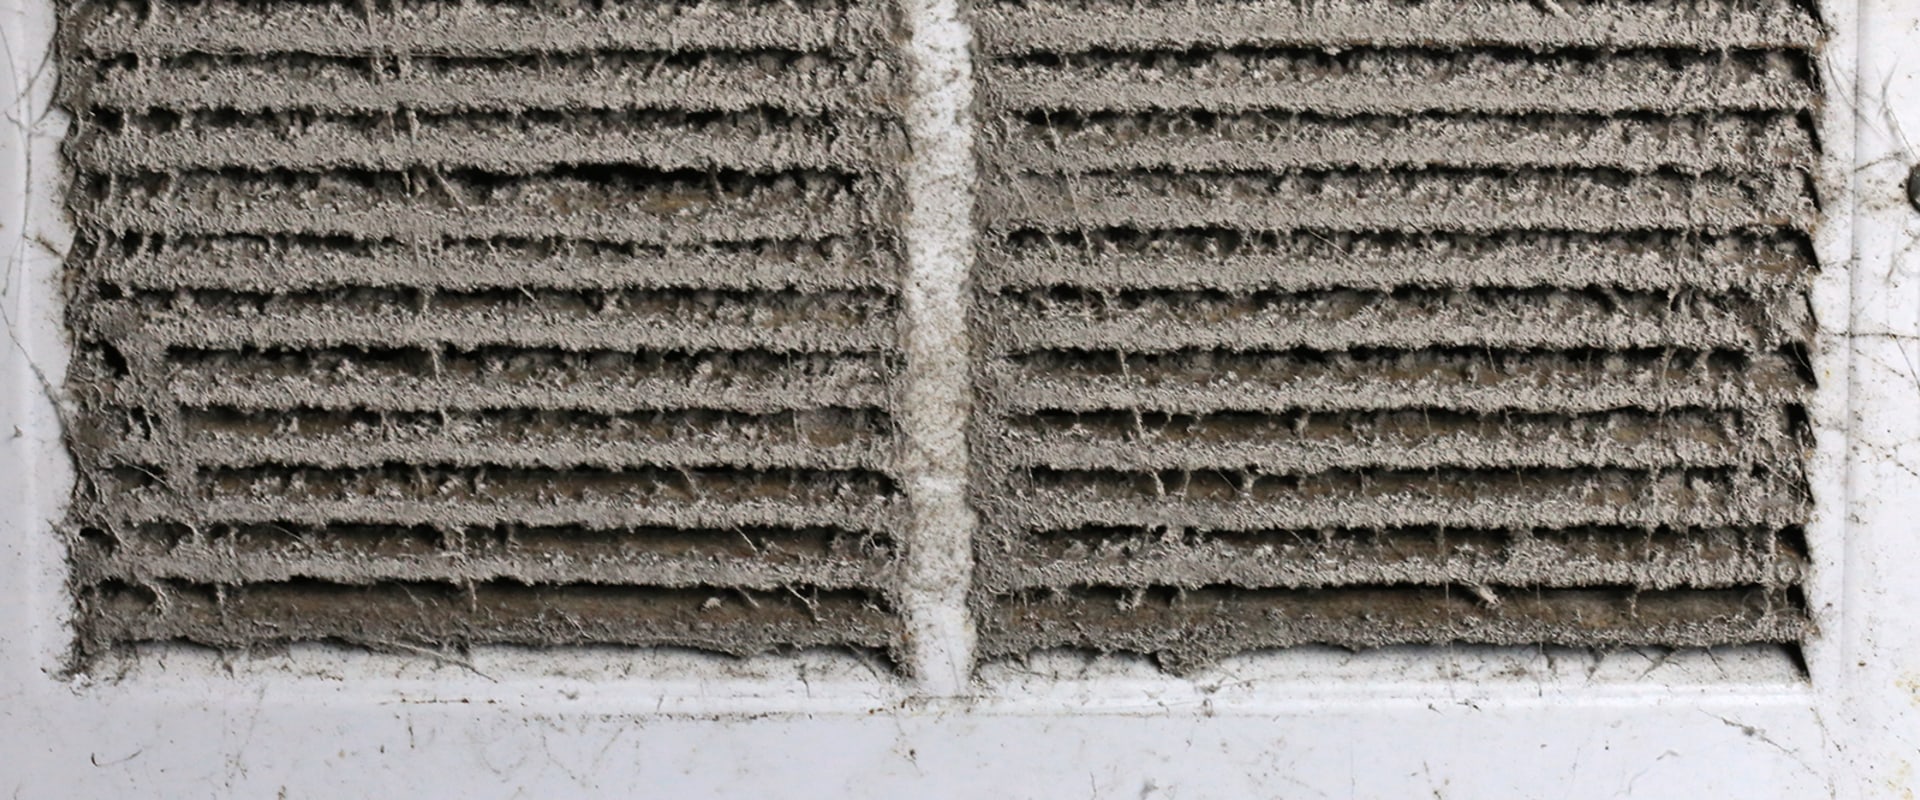 What Happens When You Don't Replace Your Air Filter: Consequences and Solutions